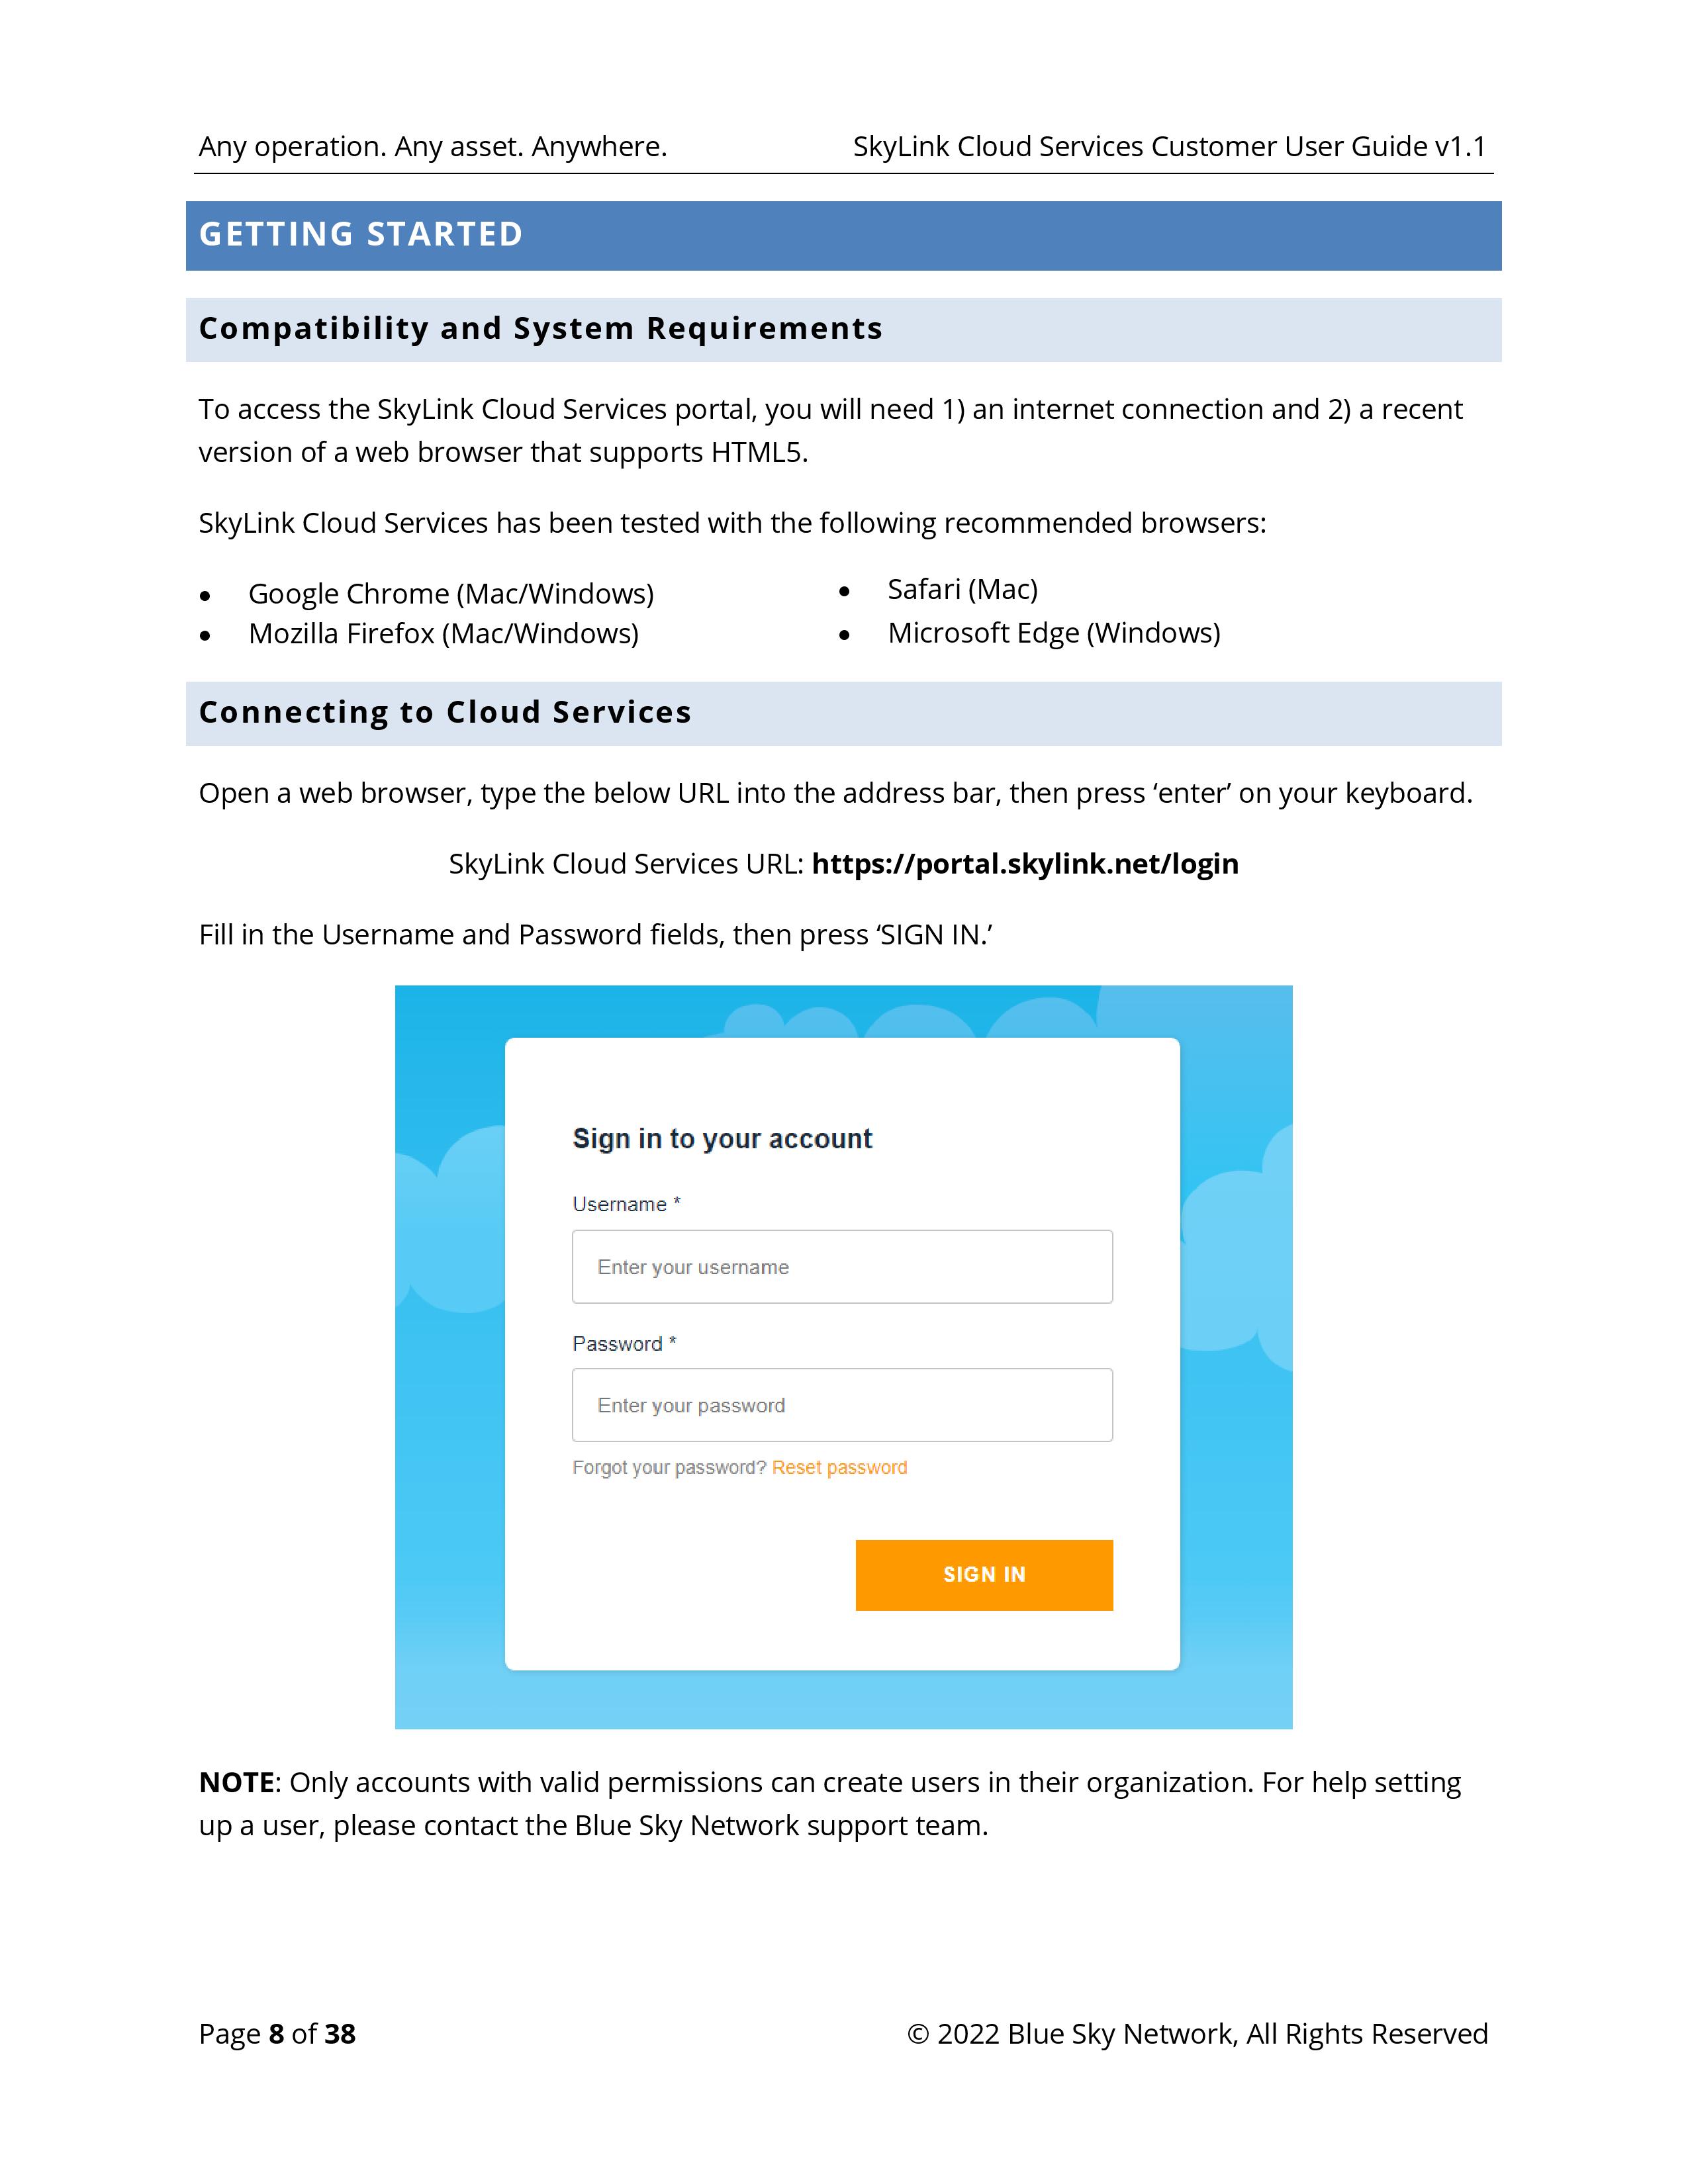 SkyLink-Cloud-Services-Customer-User-Guide-page-008.jpg